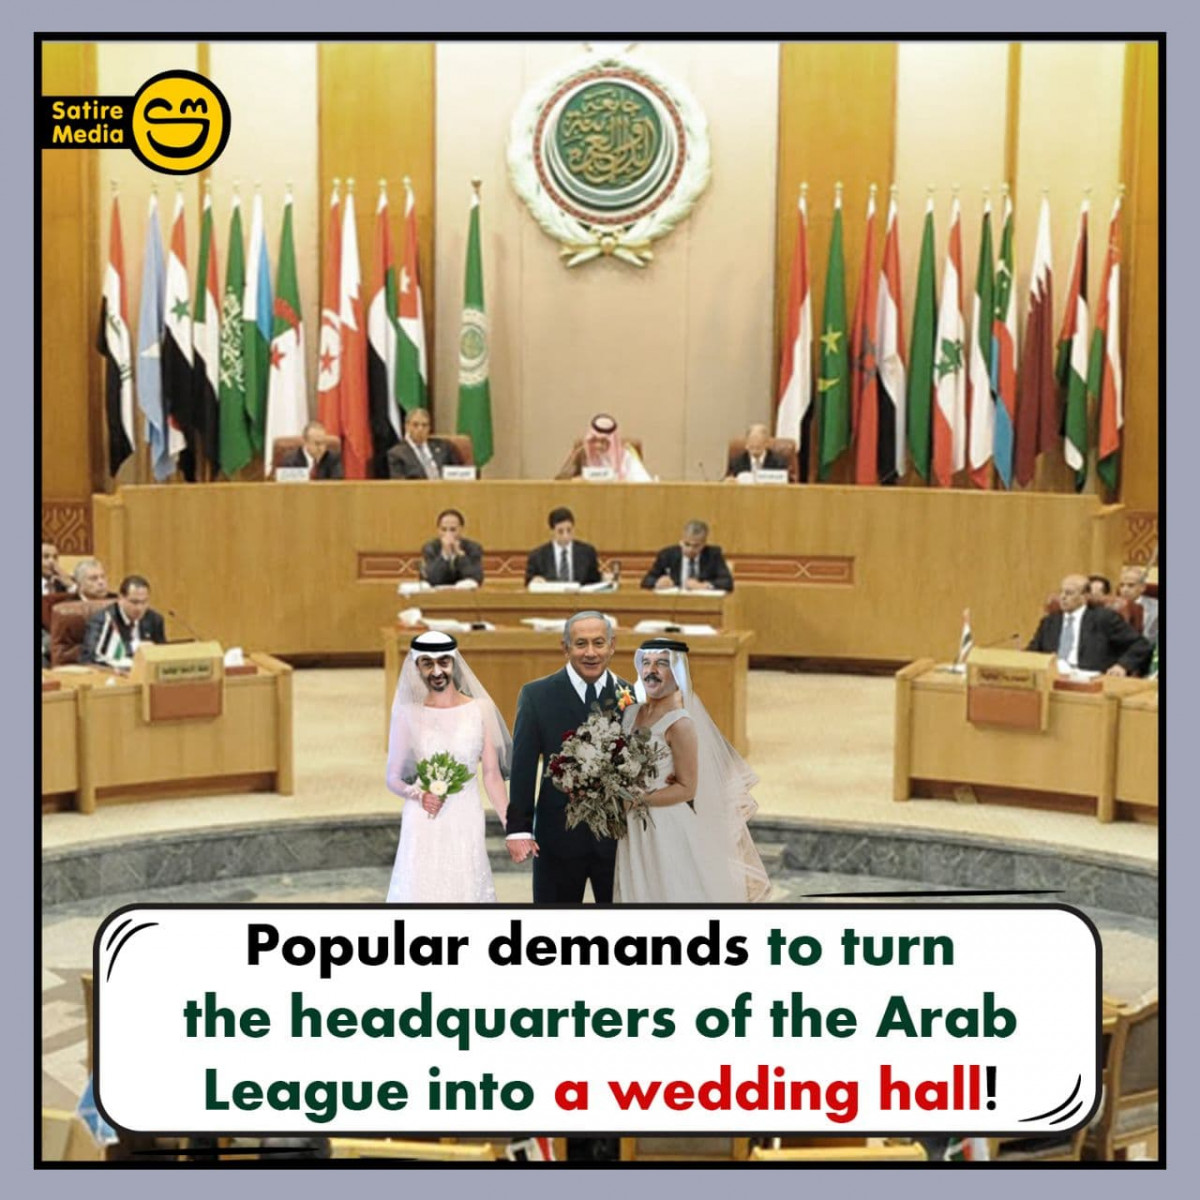 Popular demands to turn the headquarters of the Arab League into a wedding hall